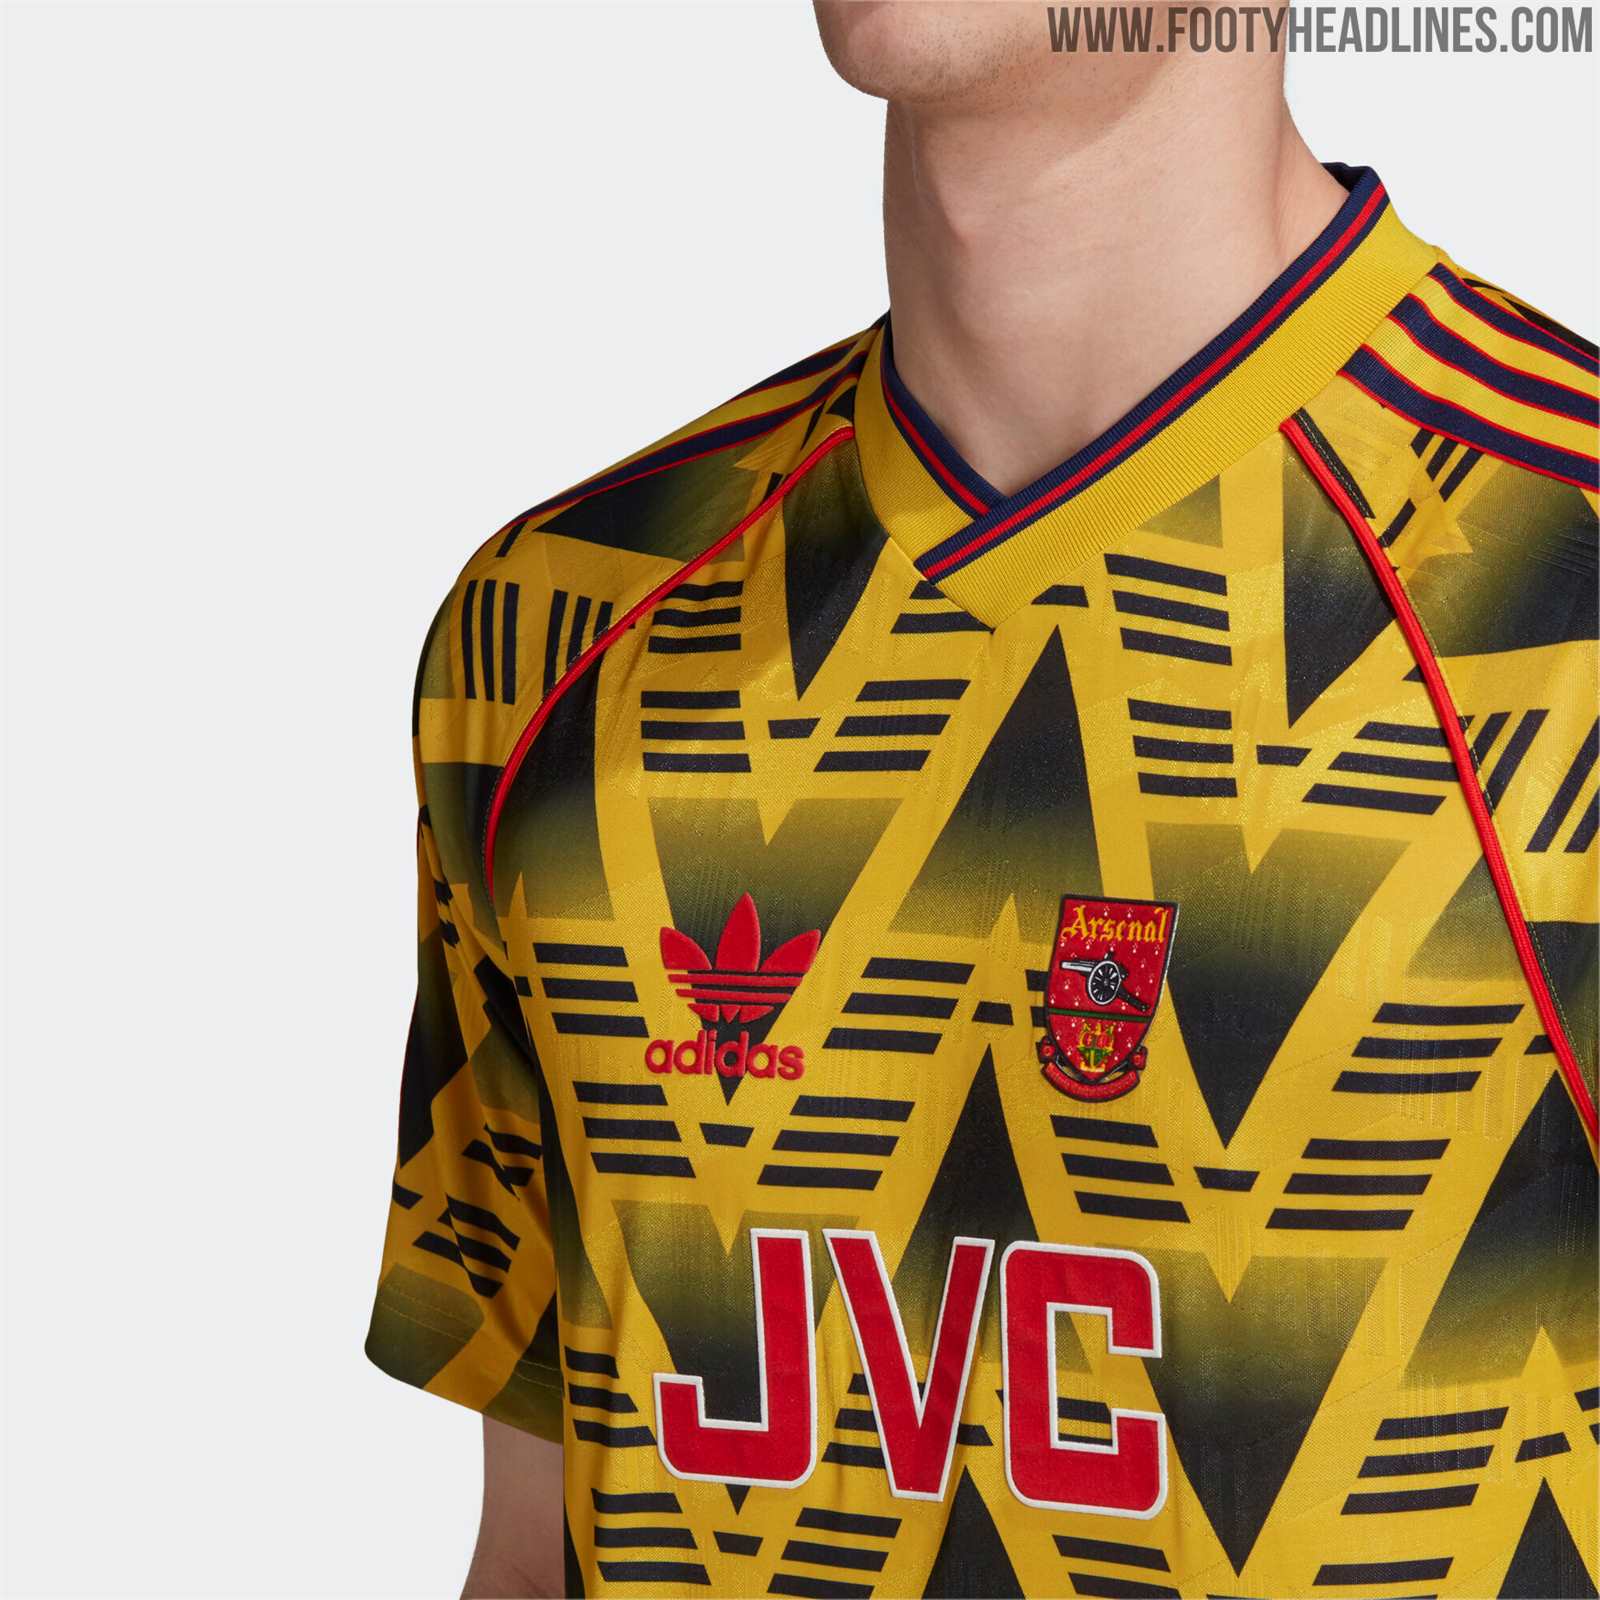 adidas and Arsenal launch retro Originals collection - SoccerBible